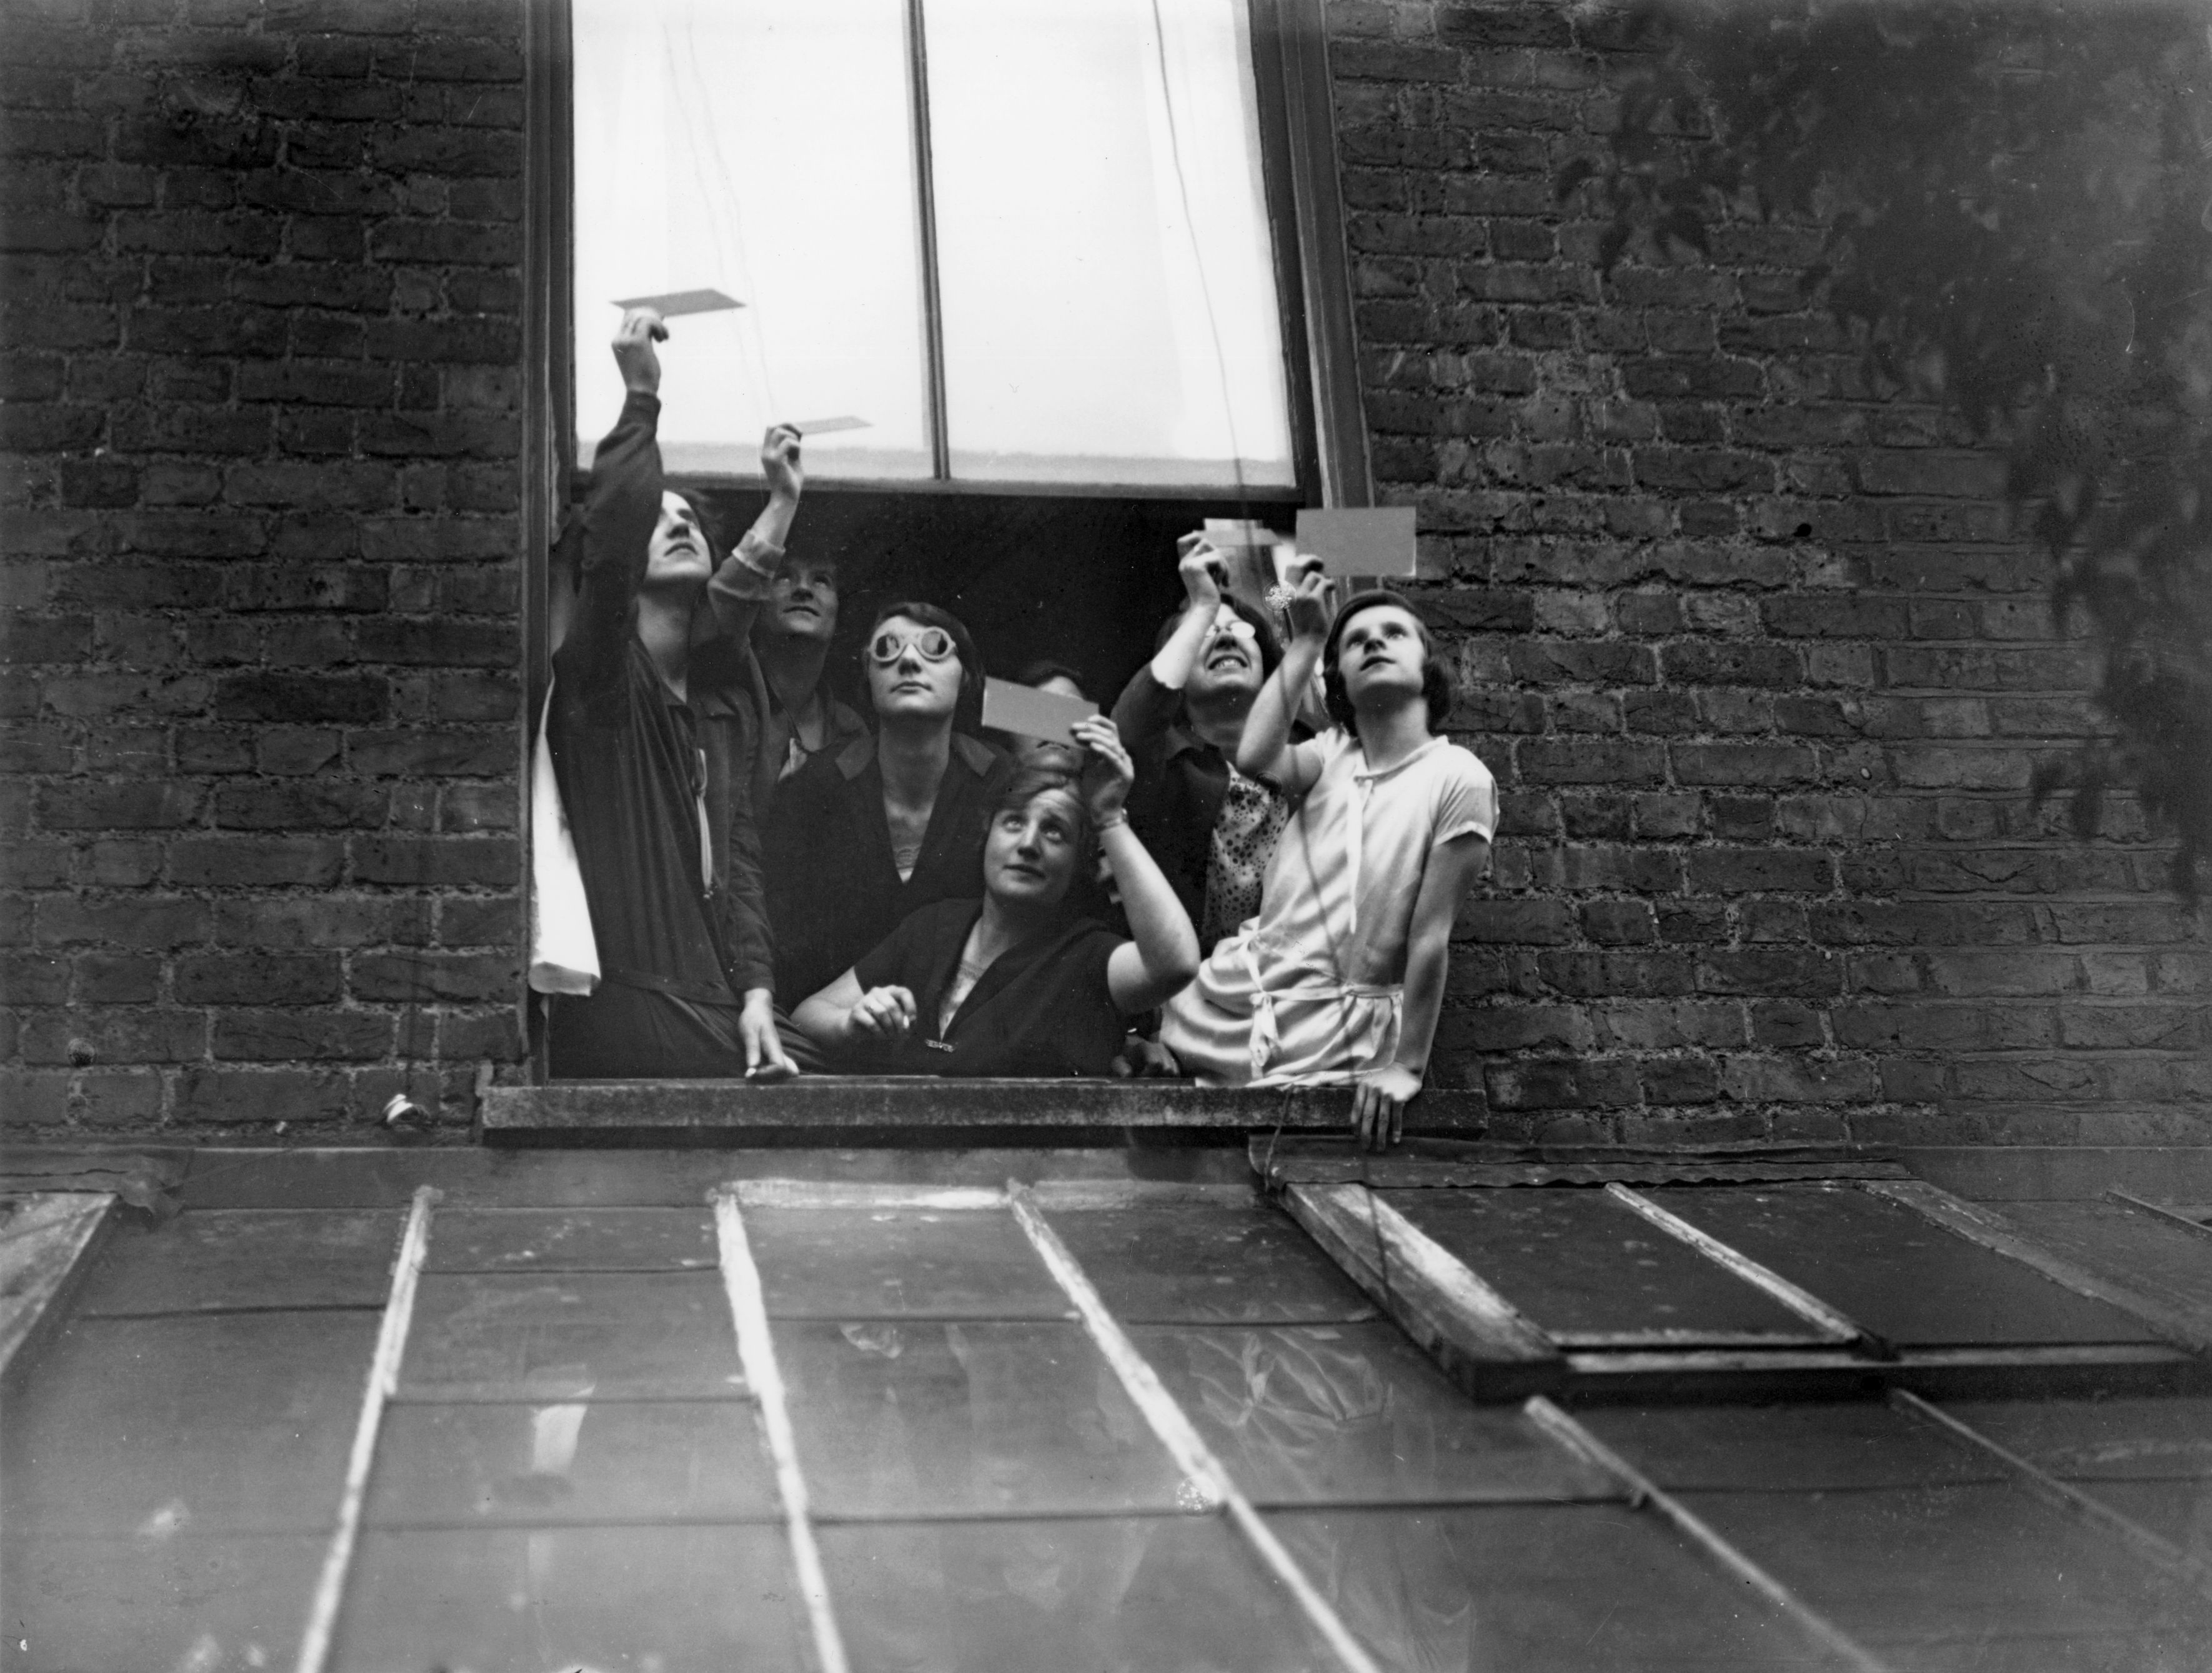 Group of people looking out a window, raising hands upward, with expressions of anticipation or excitement